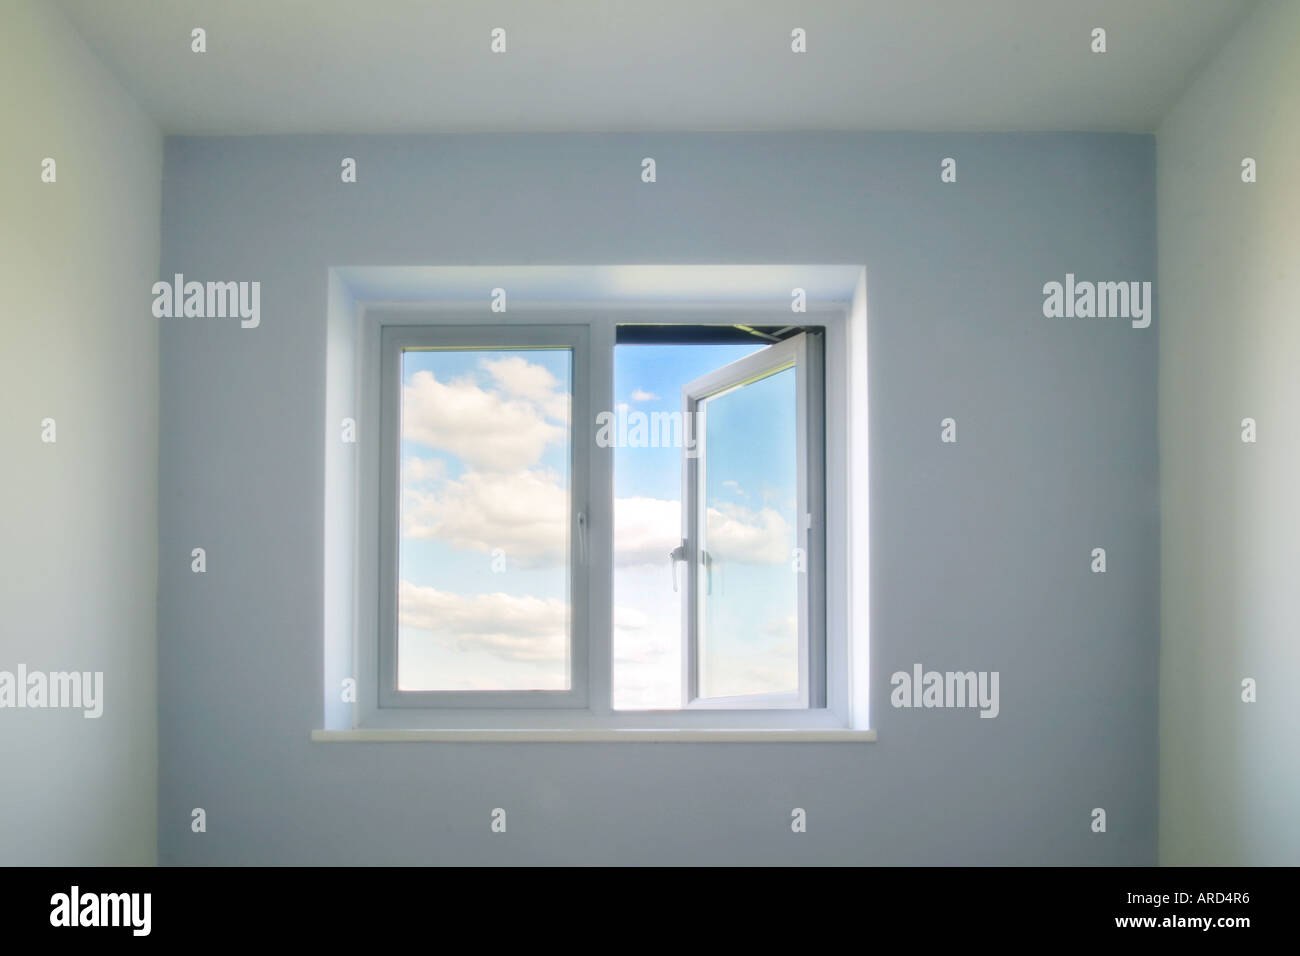 concept image of a an open window Stock Photo